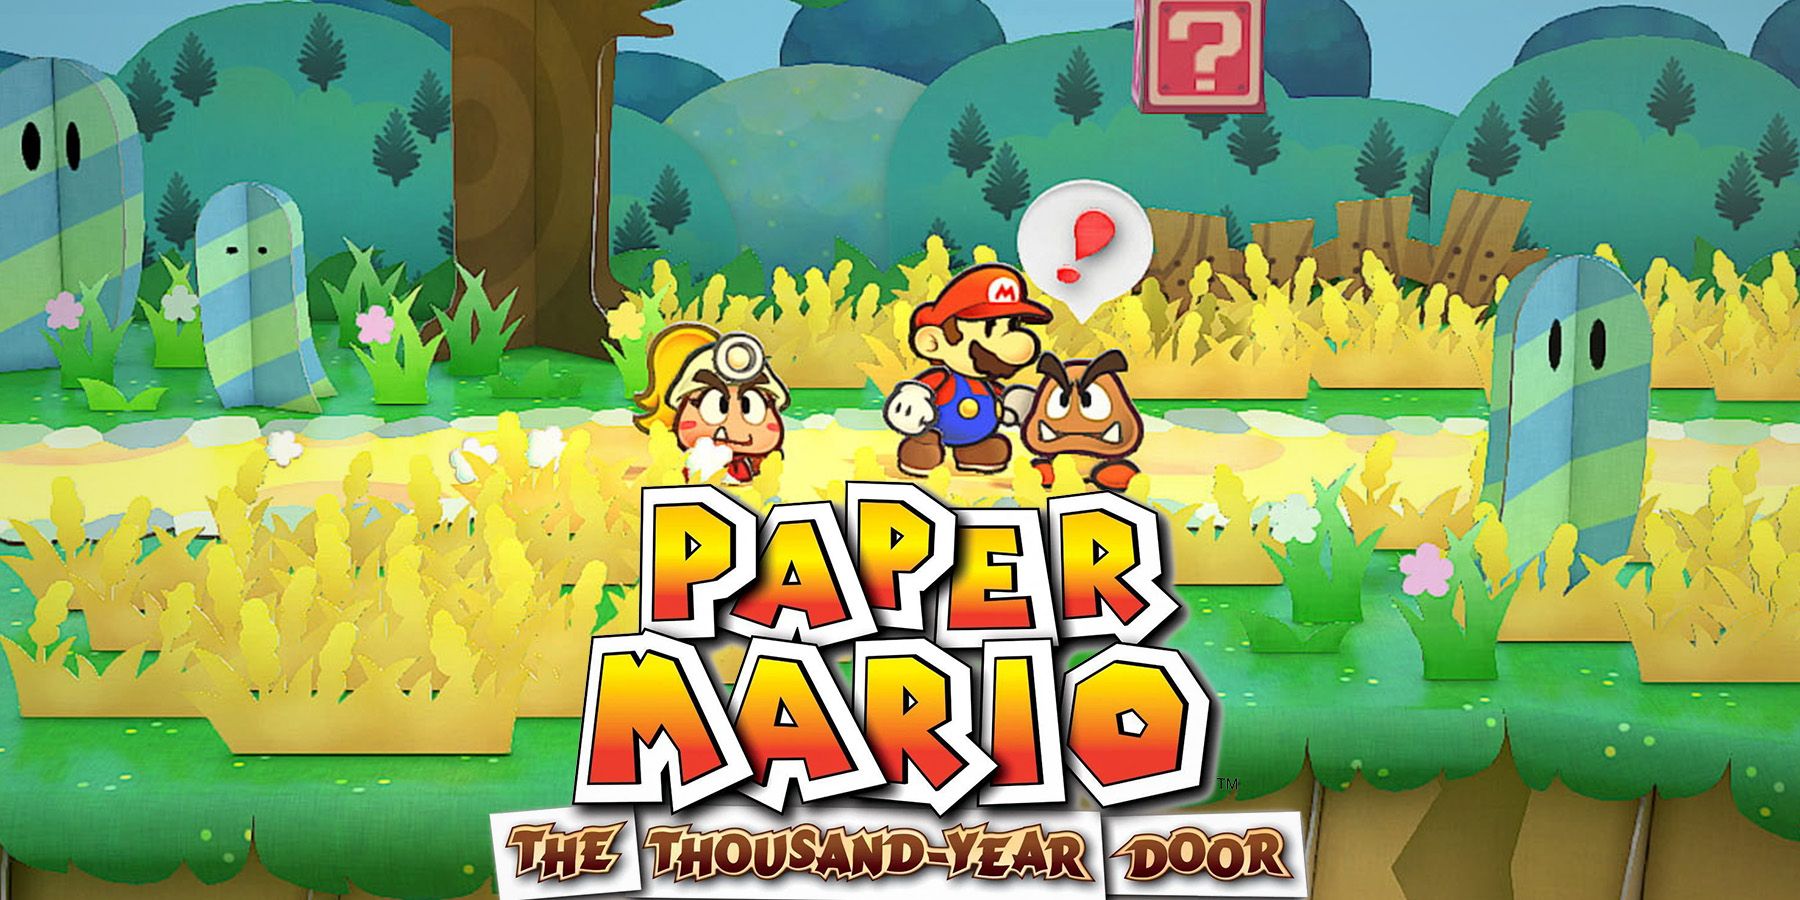 Paper Mario The Thousand Year Door Switch remake field screenshot with game logo